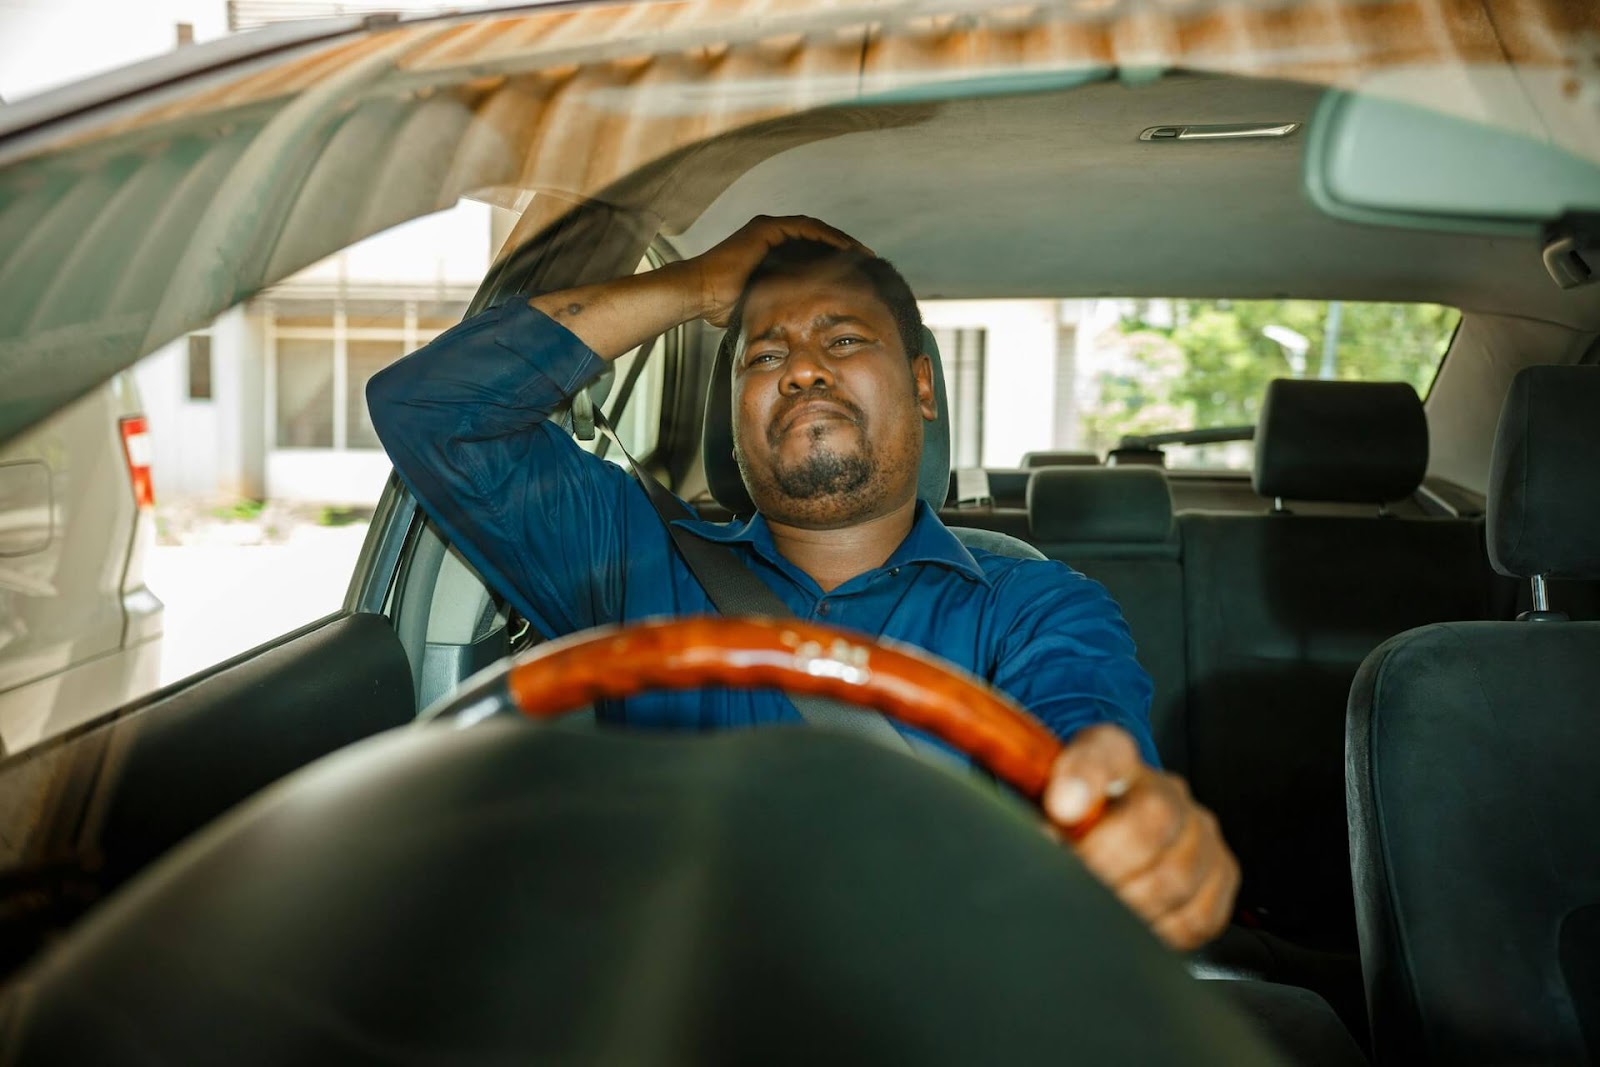 Man with worried expression in a car.